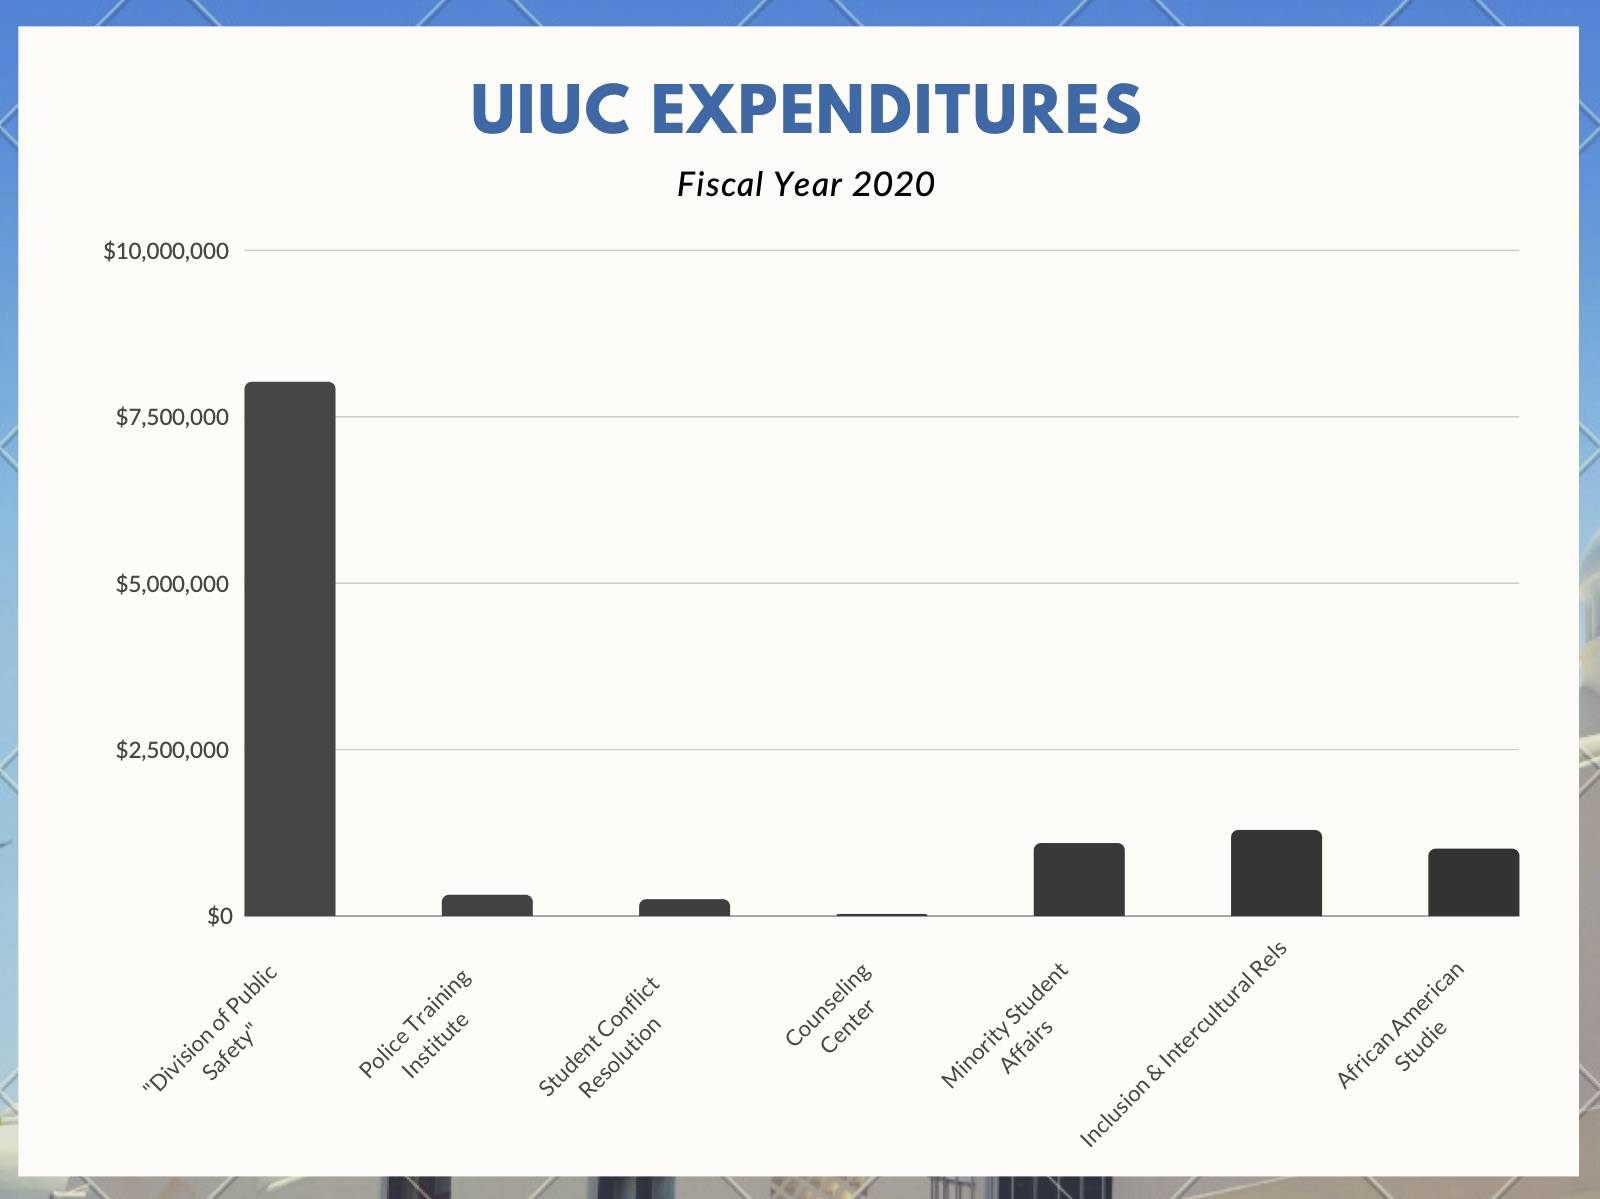 IMAGE: A bar graph showcasing UIUC Expenditures for Fiscal Year 2020.